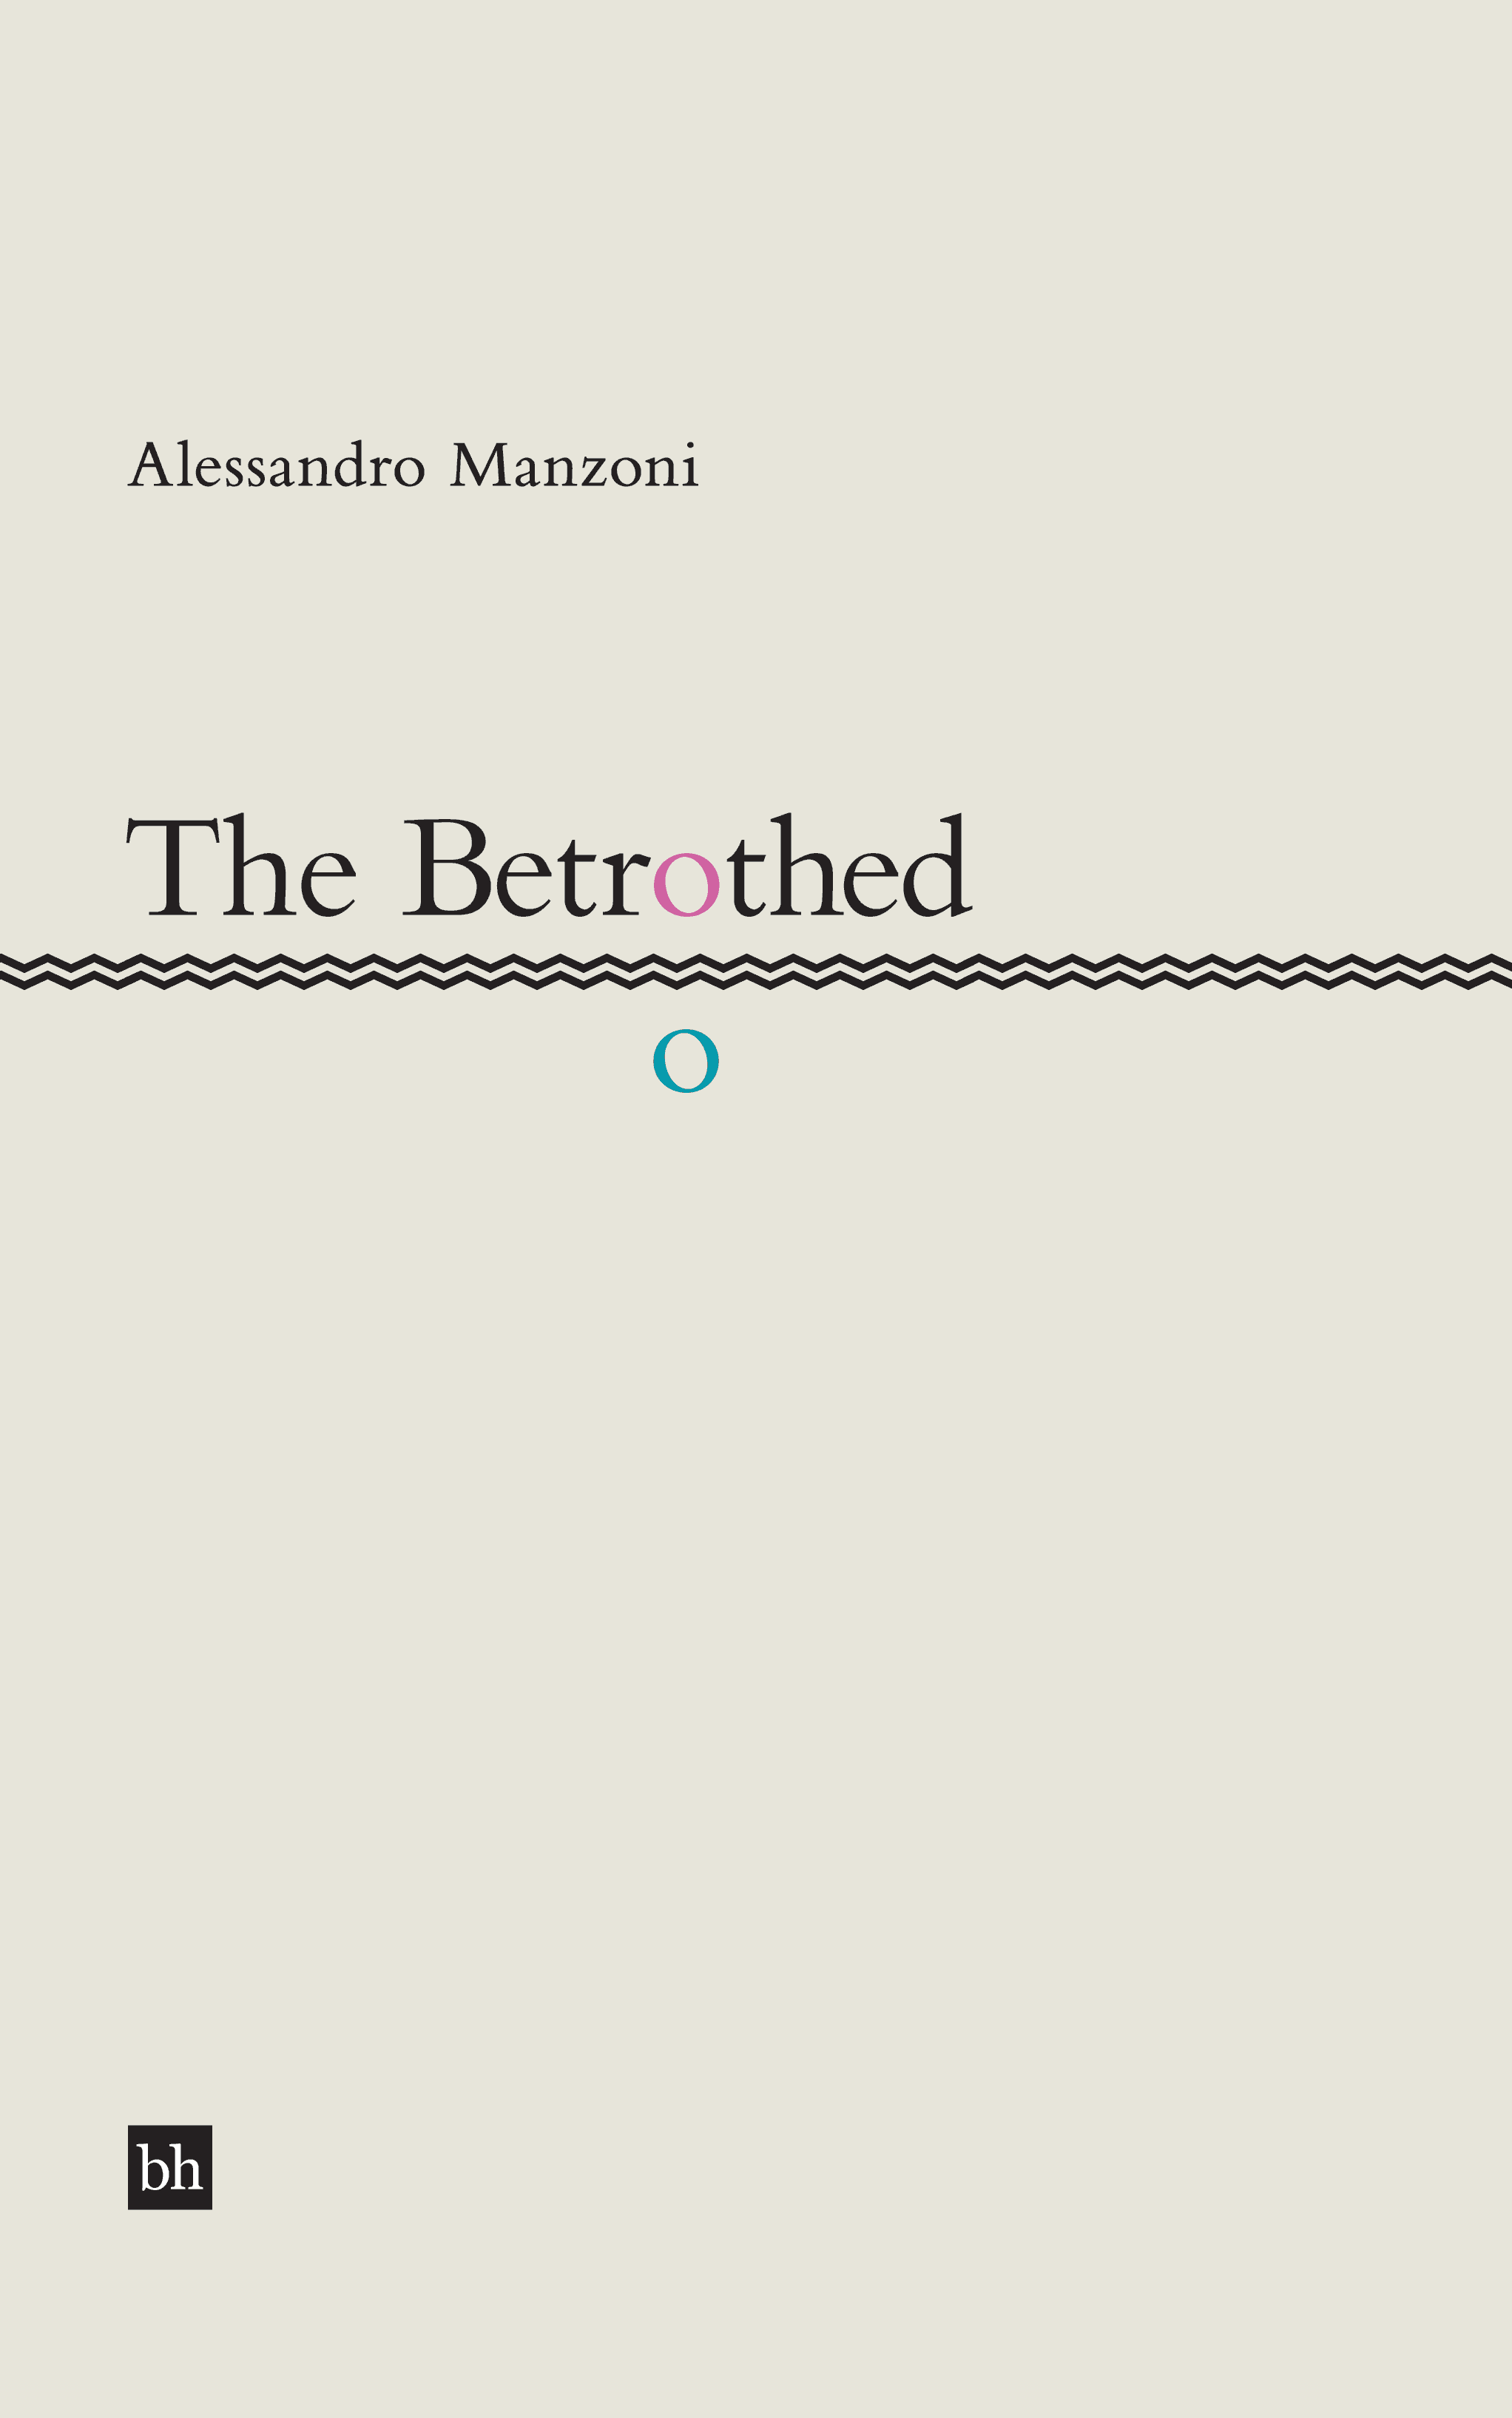 The Betrothed by Alessandro Manzoni